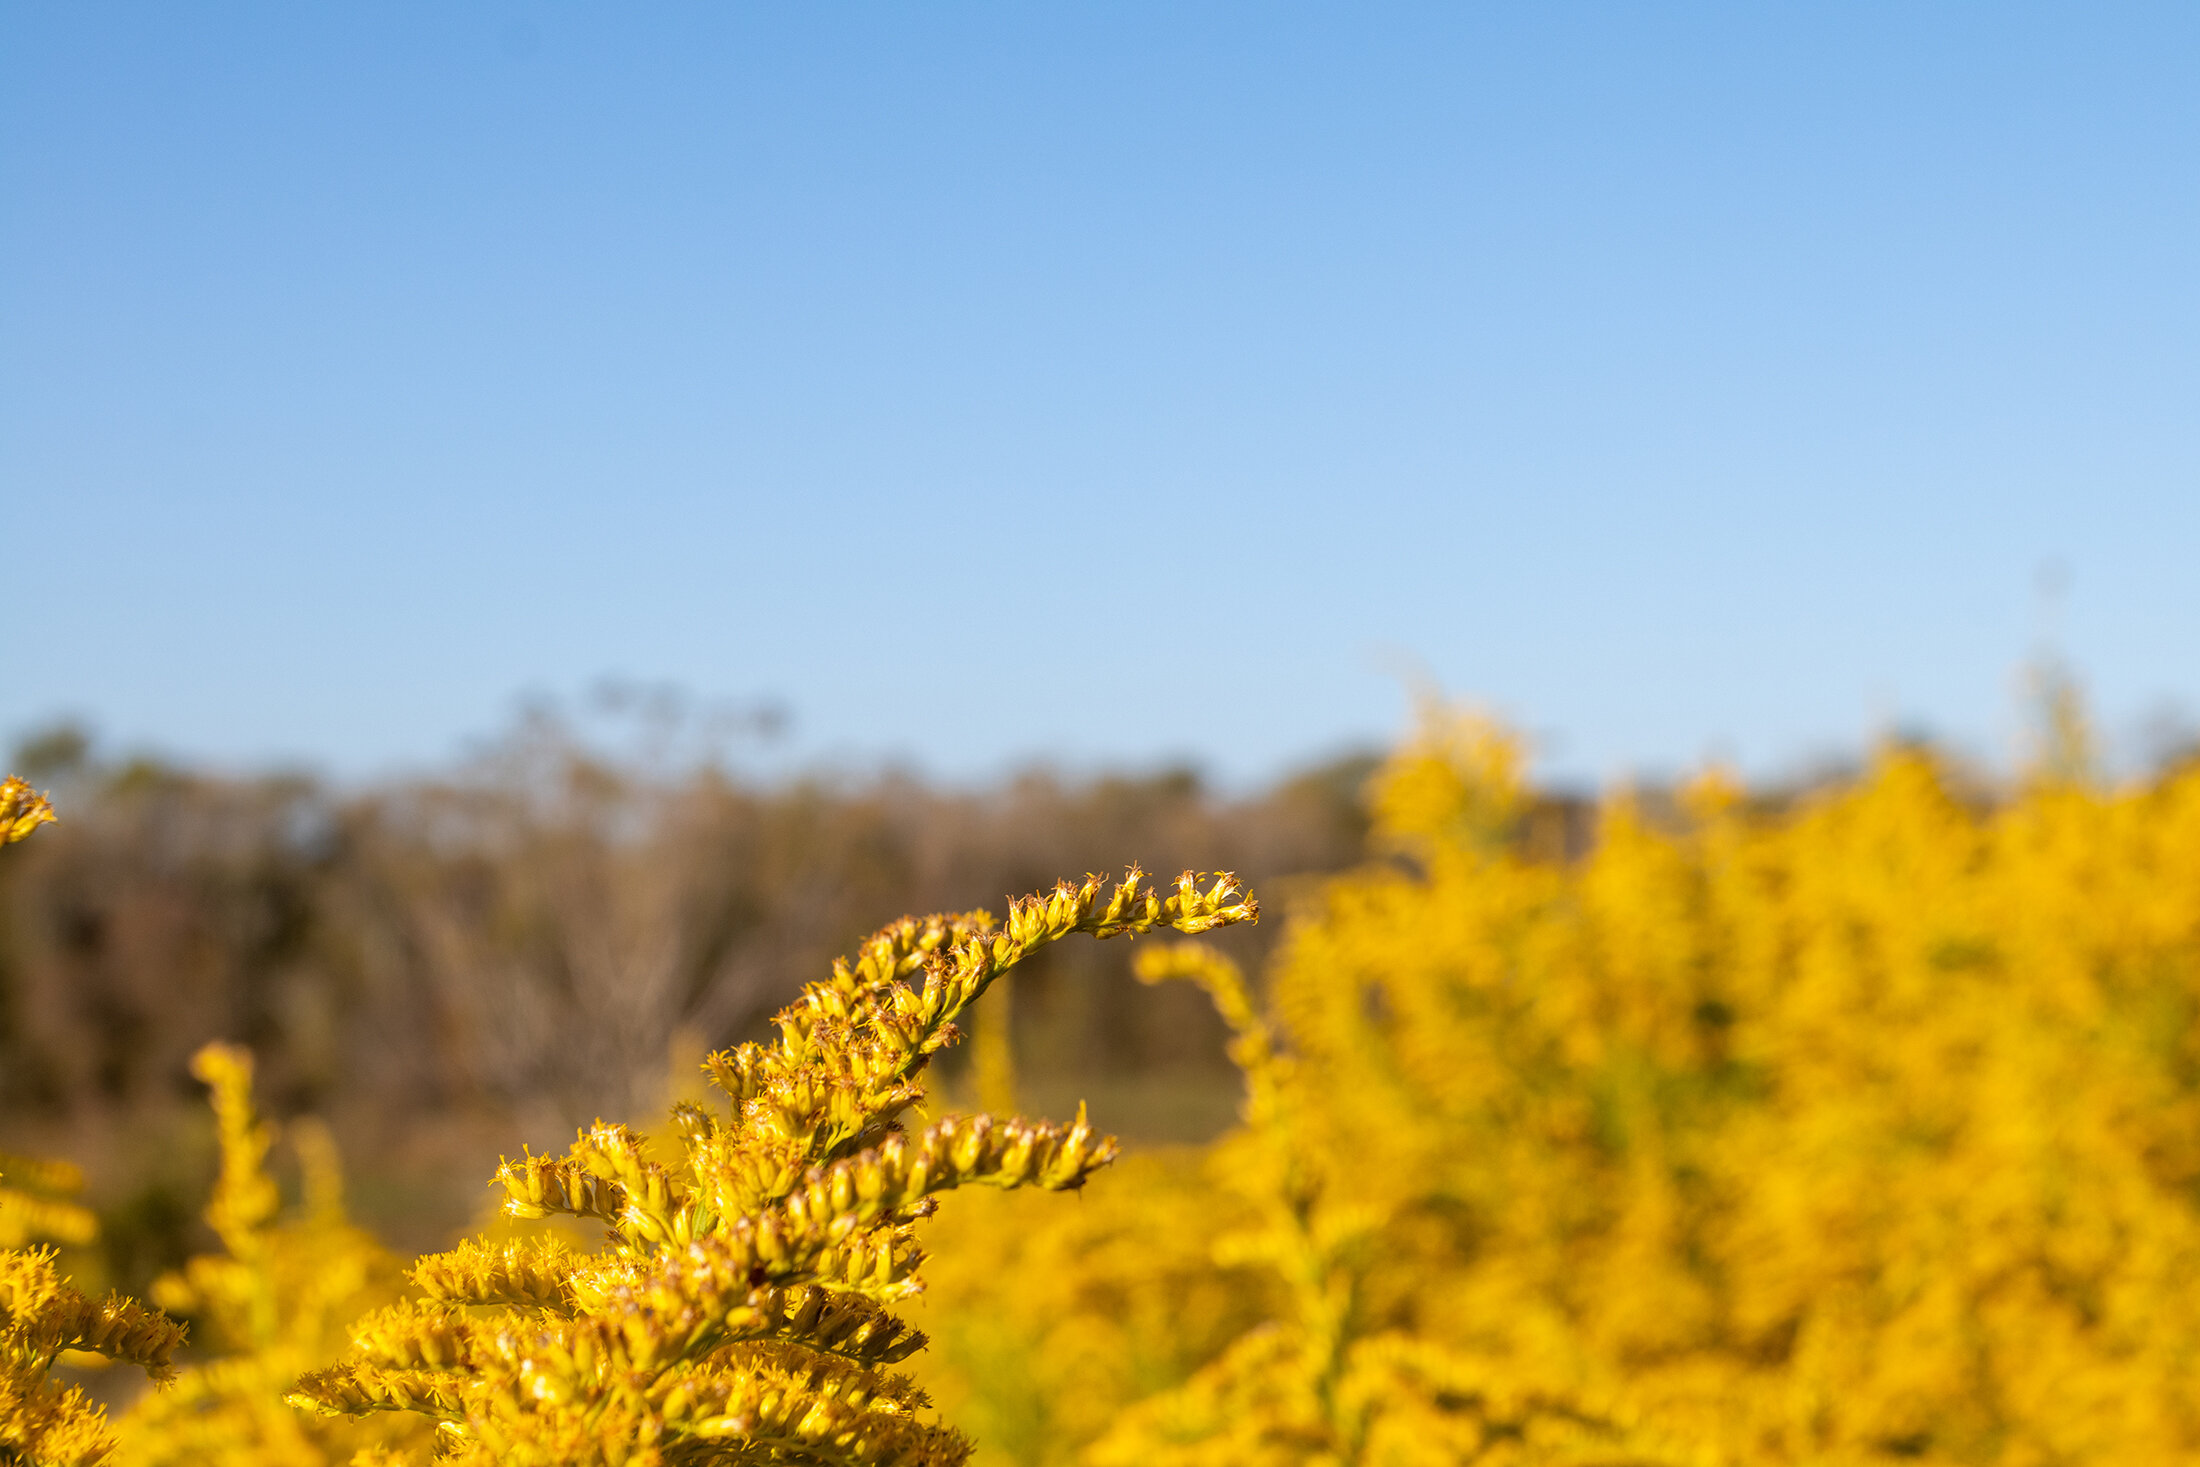 Goldenrod is a type of weedy herb that is food for birds.